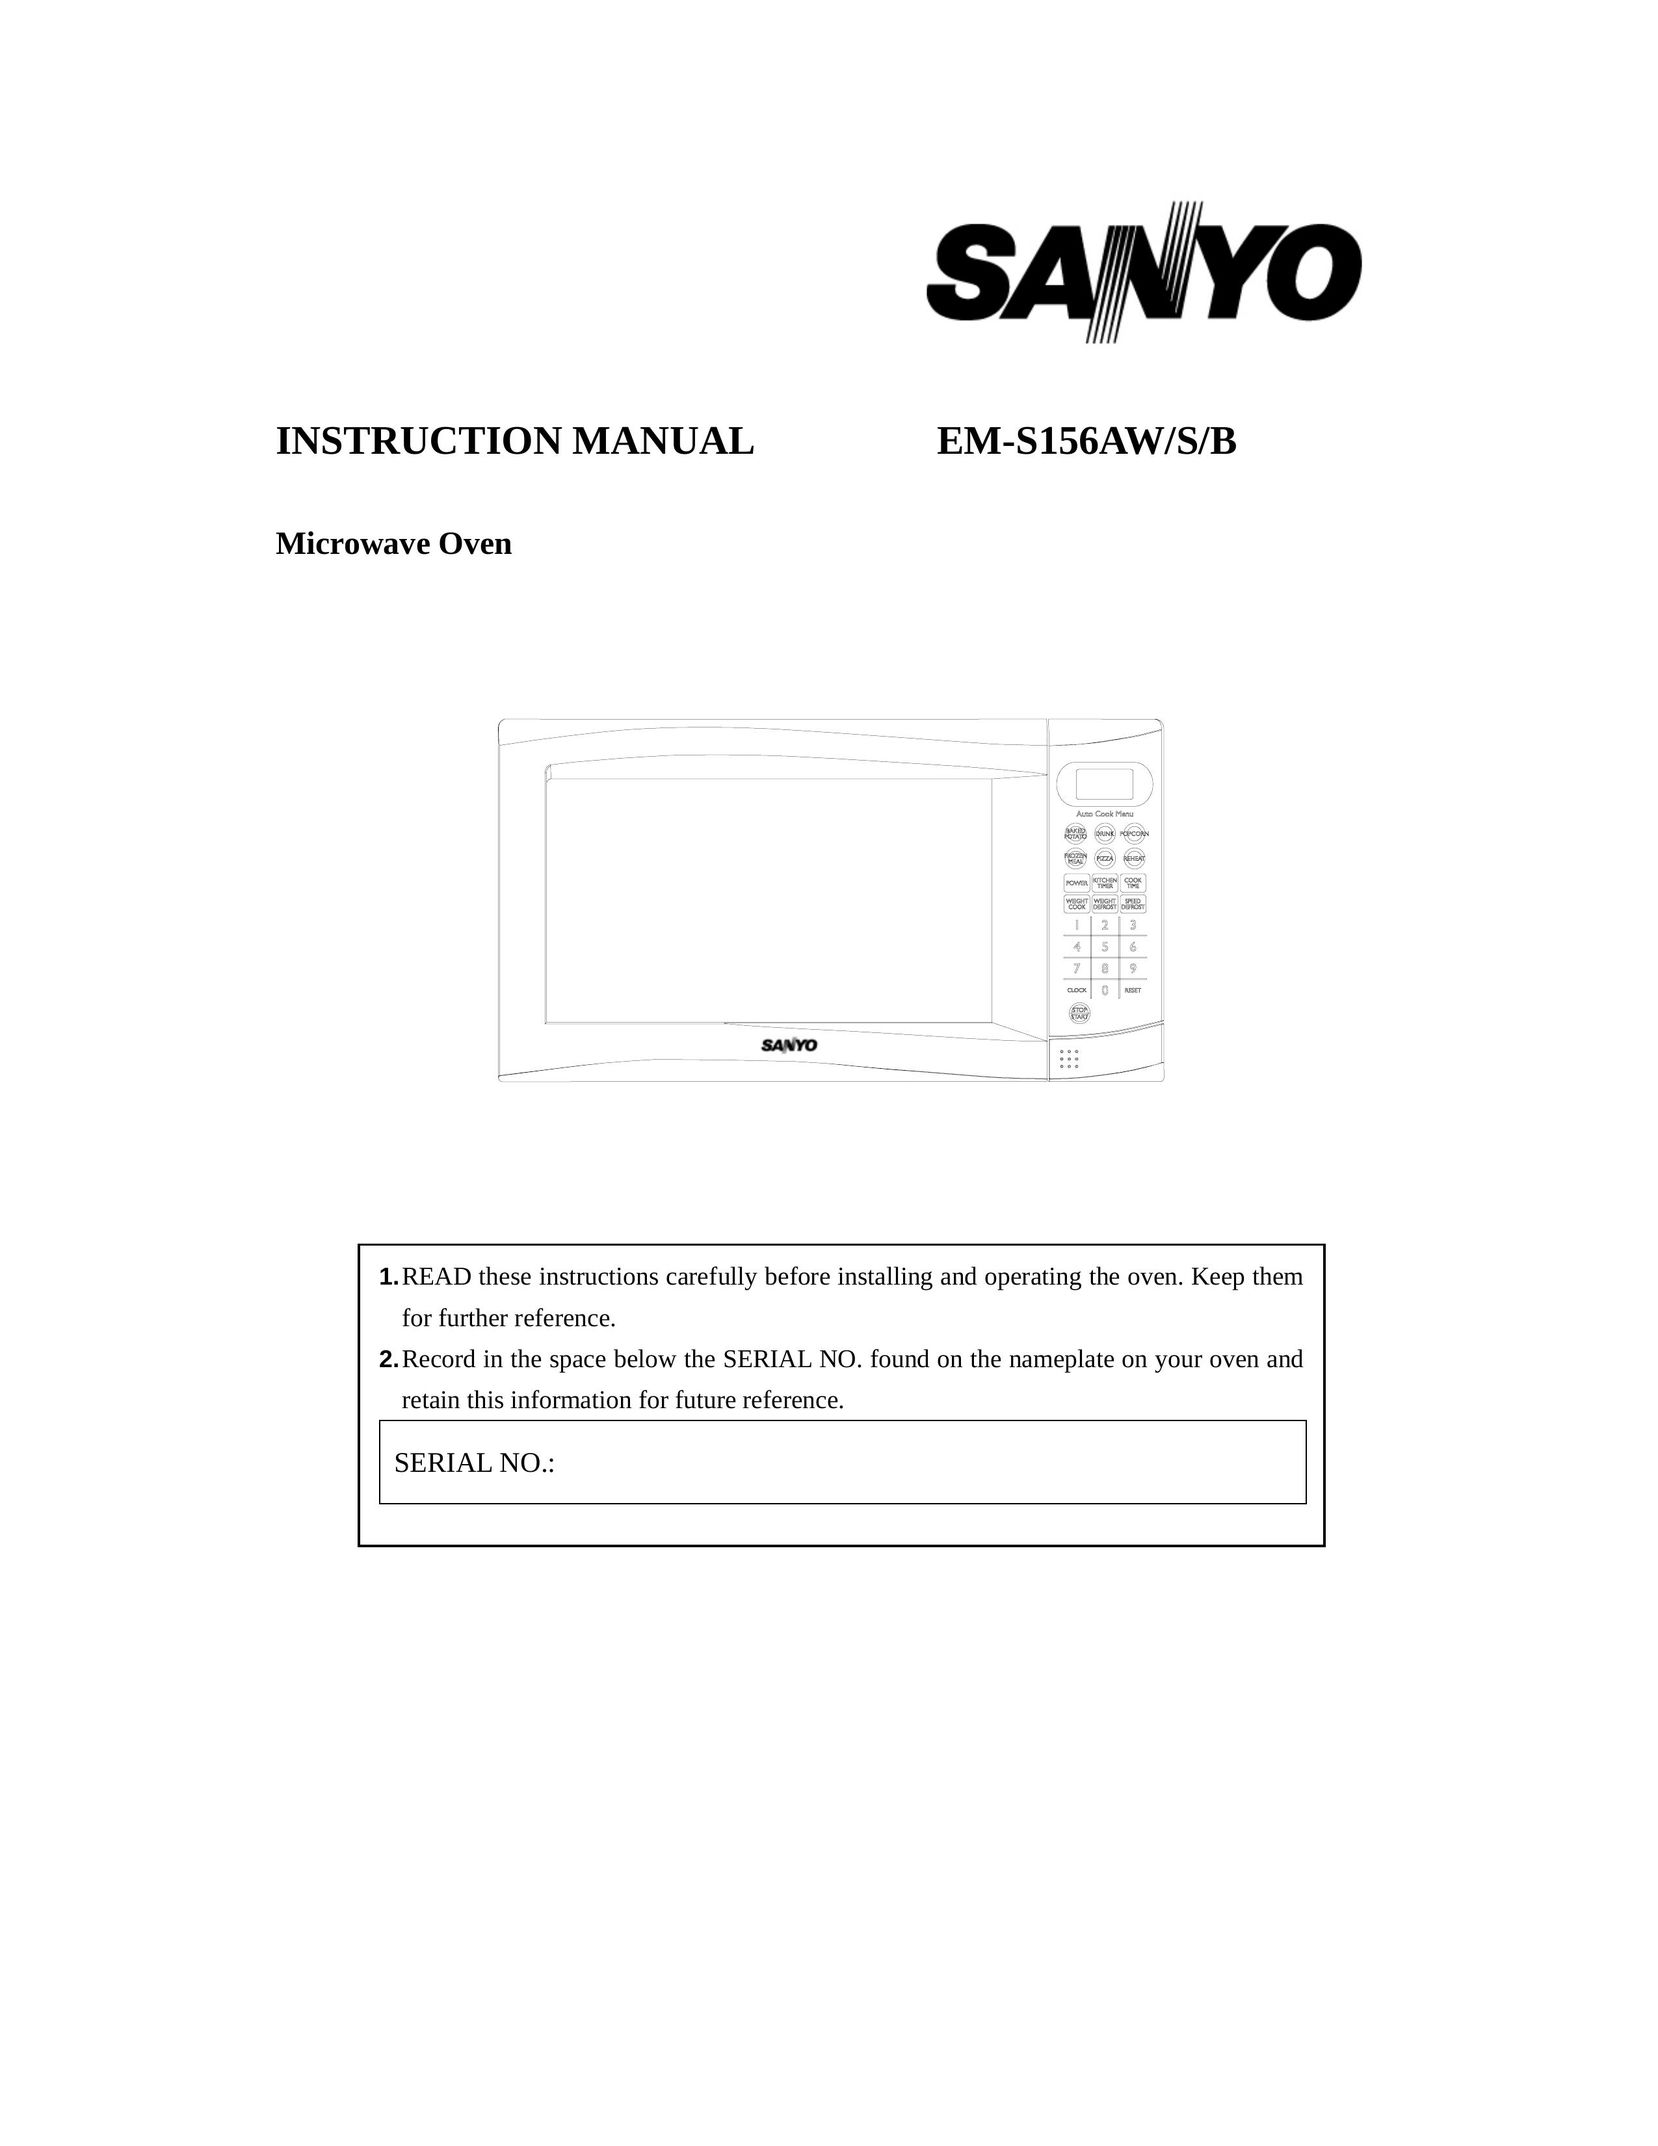 Sanyo EM-S156AW Microwave Oven User Manual